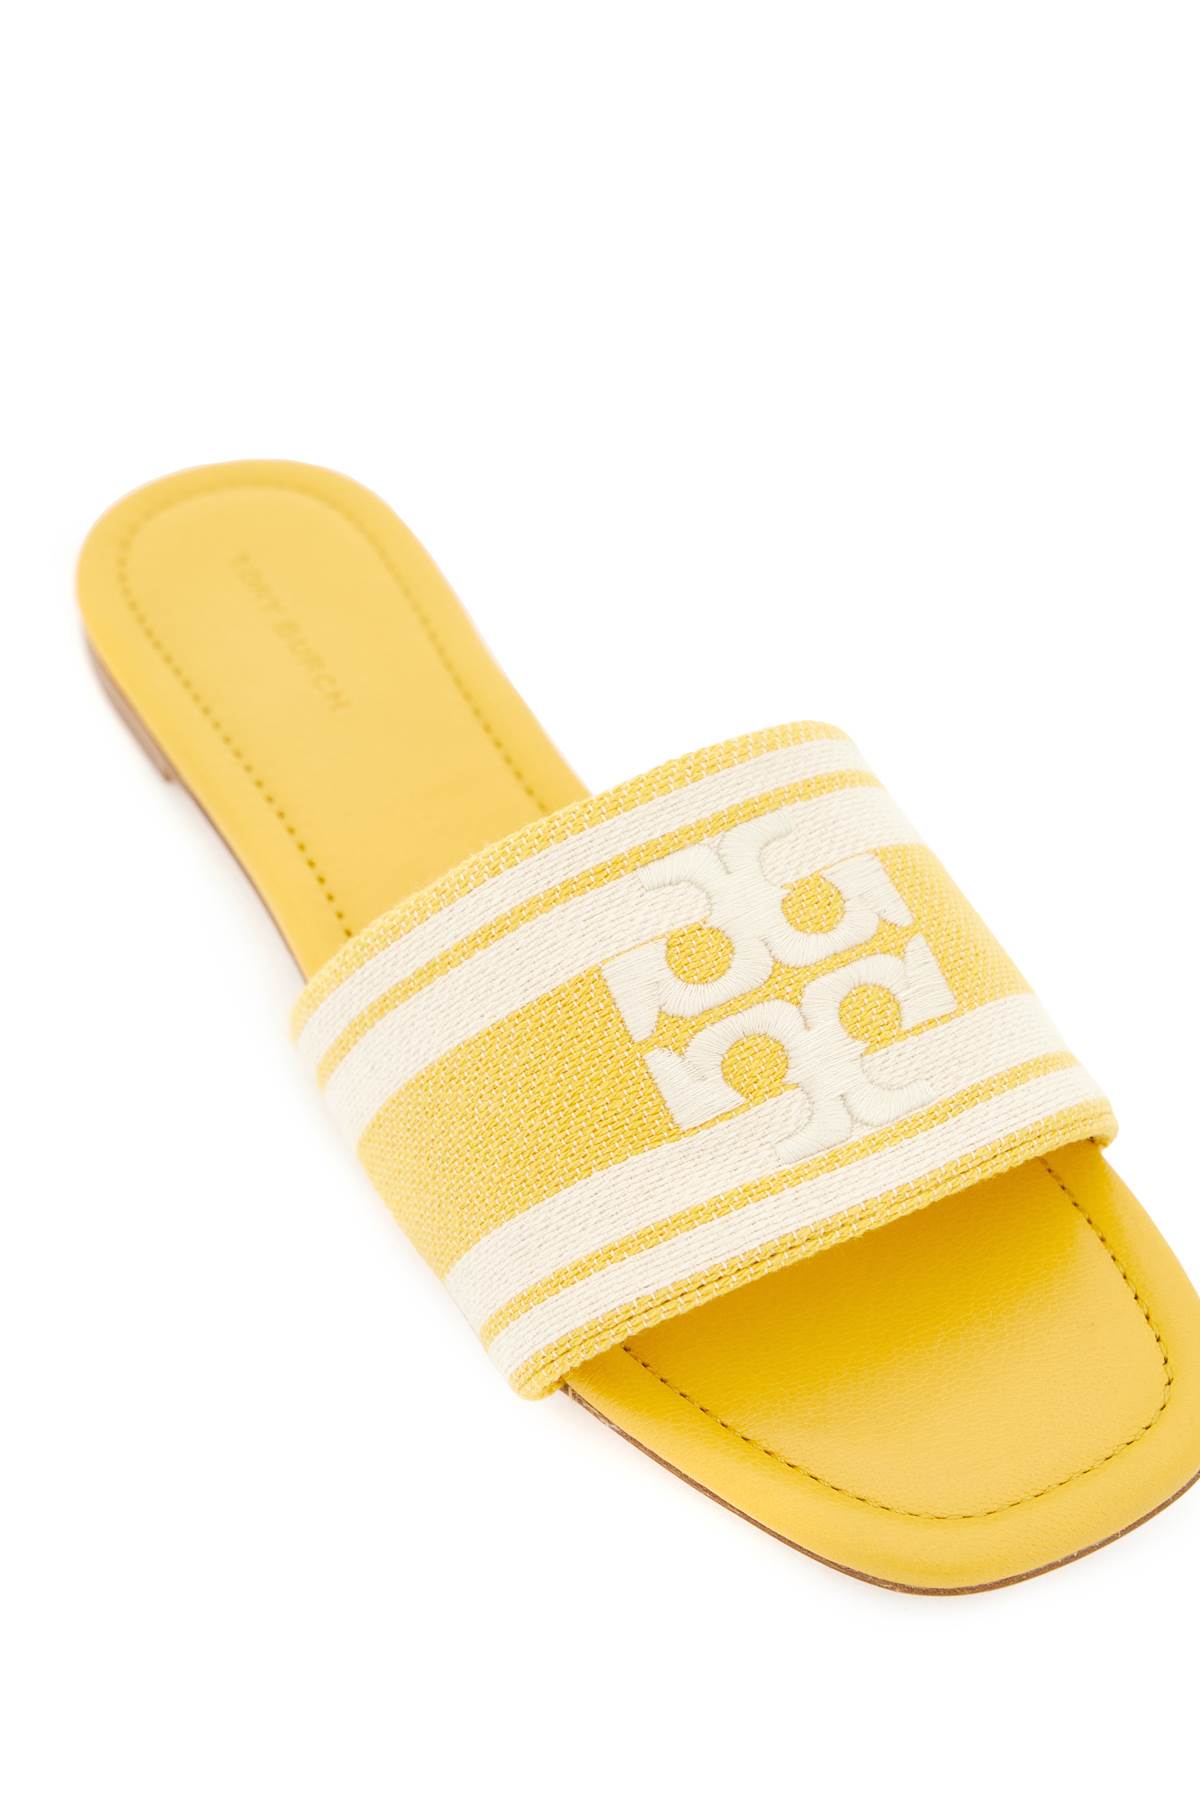 Shop Tory Burch Slides With Embroidered Band In Mellow Yellow Ash White (yellow)